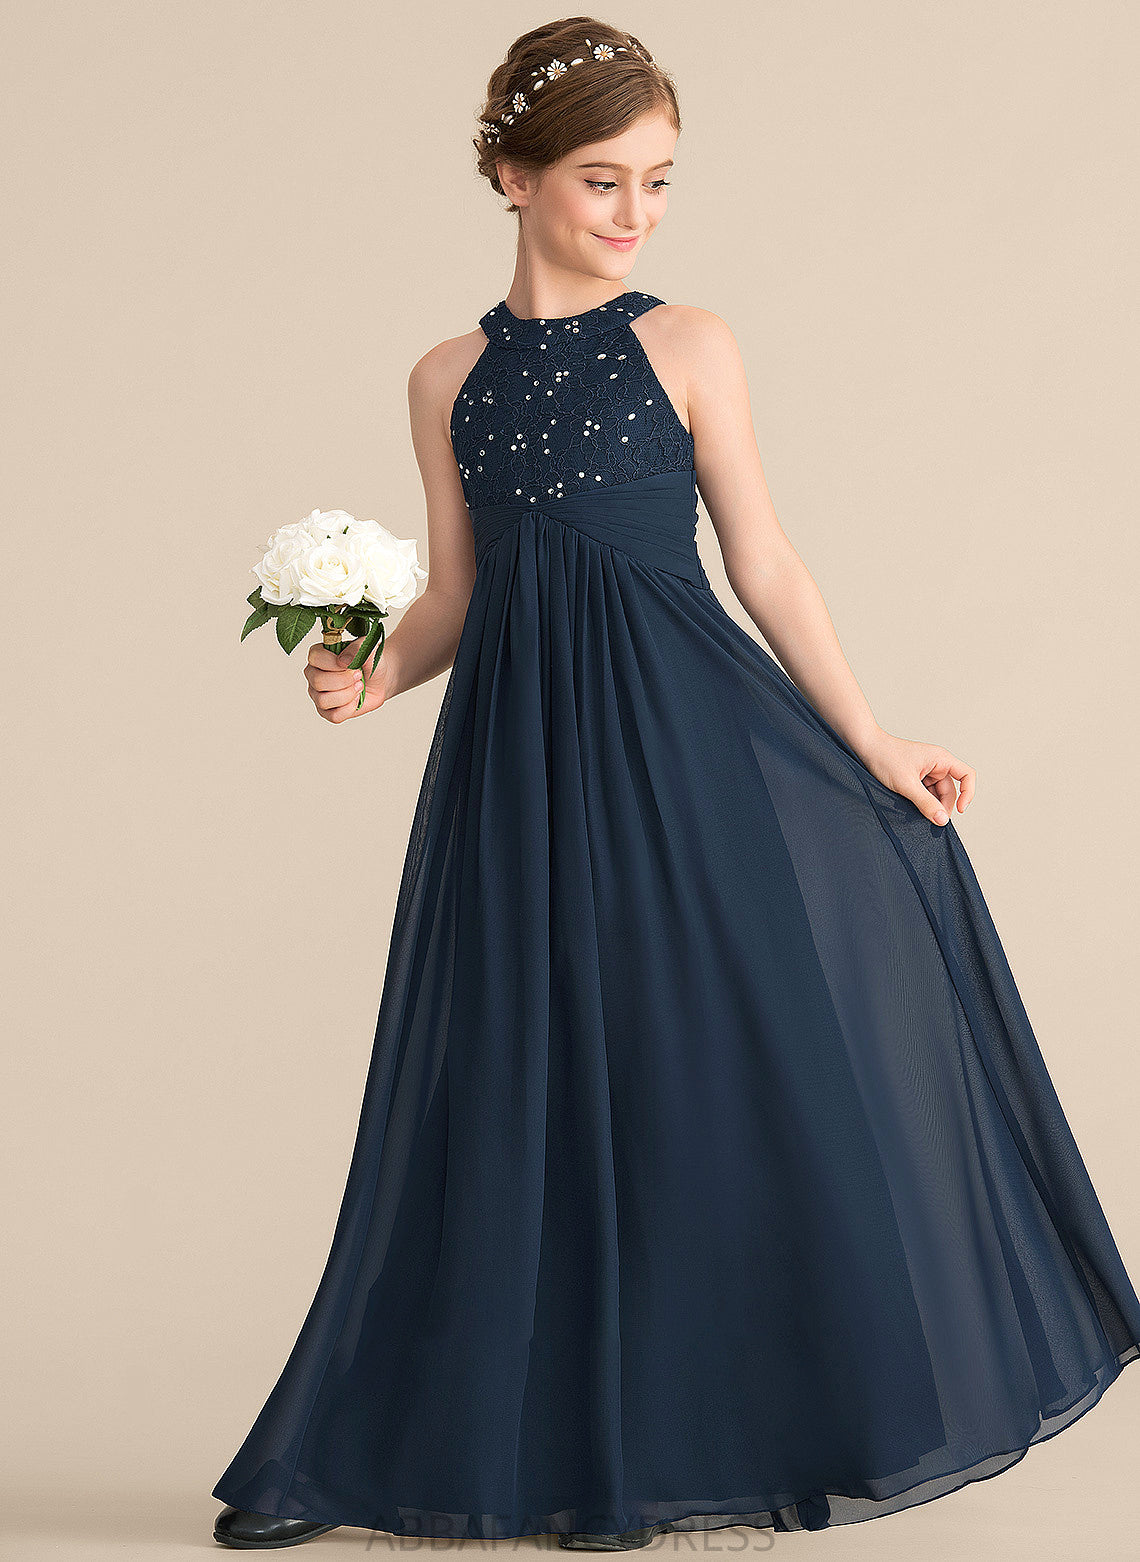 Neck Junior Bridesmaid Dresses Beading Scoop Kaley Chiffon Ruffle Lace A-Line Floor-Length With